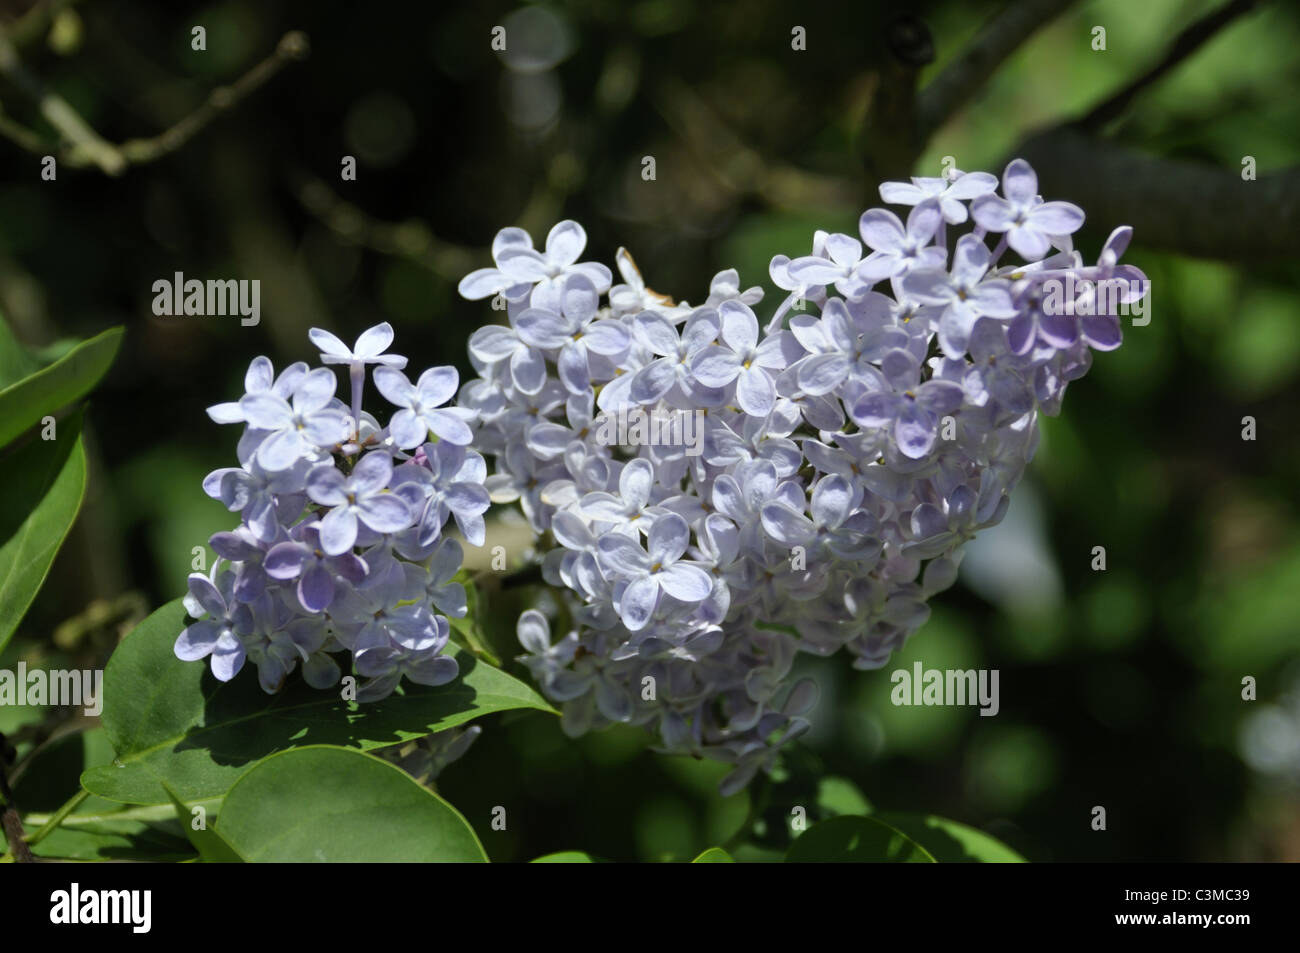 Bunch of flowers from the Lilac tree (Syringa sp.) Stock Photo